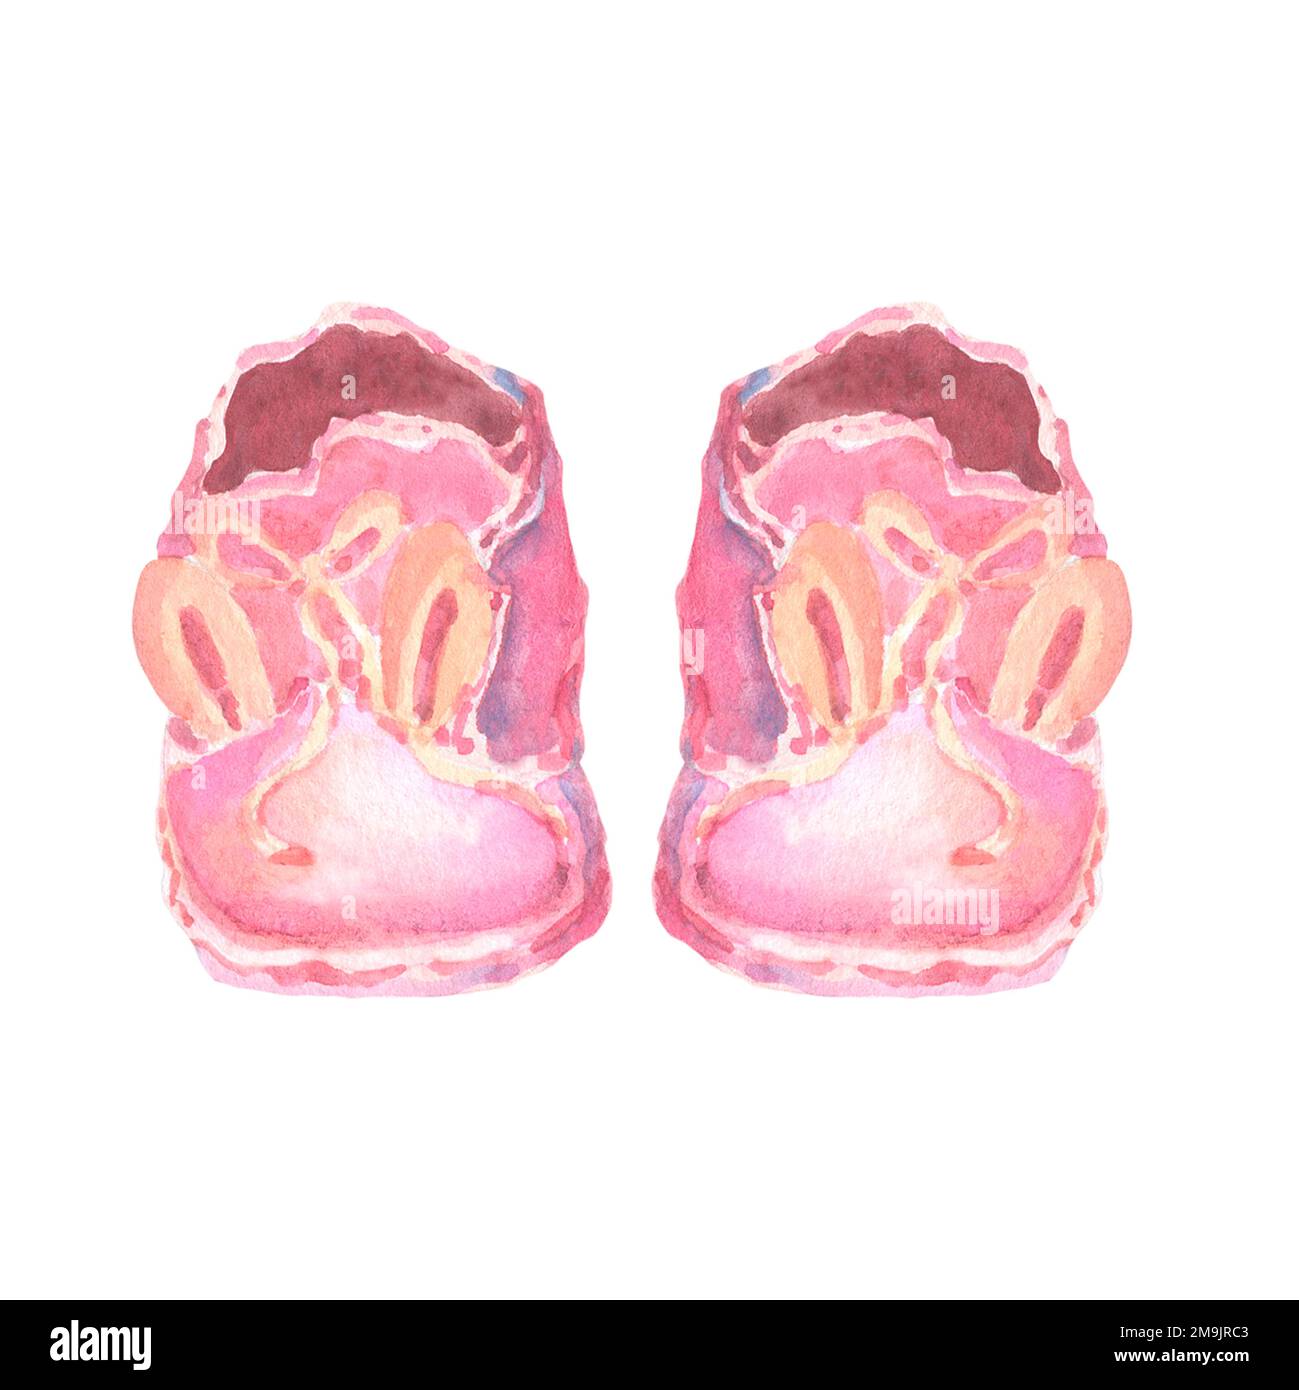 Hand Drawn Watercolor pink vintage Baby Shoes witn bunny ears. Design elements for baby shower greeting card. Stock Photo